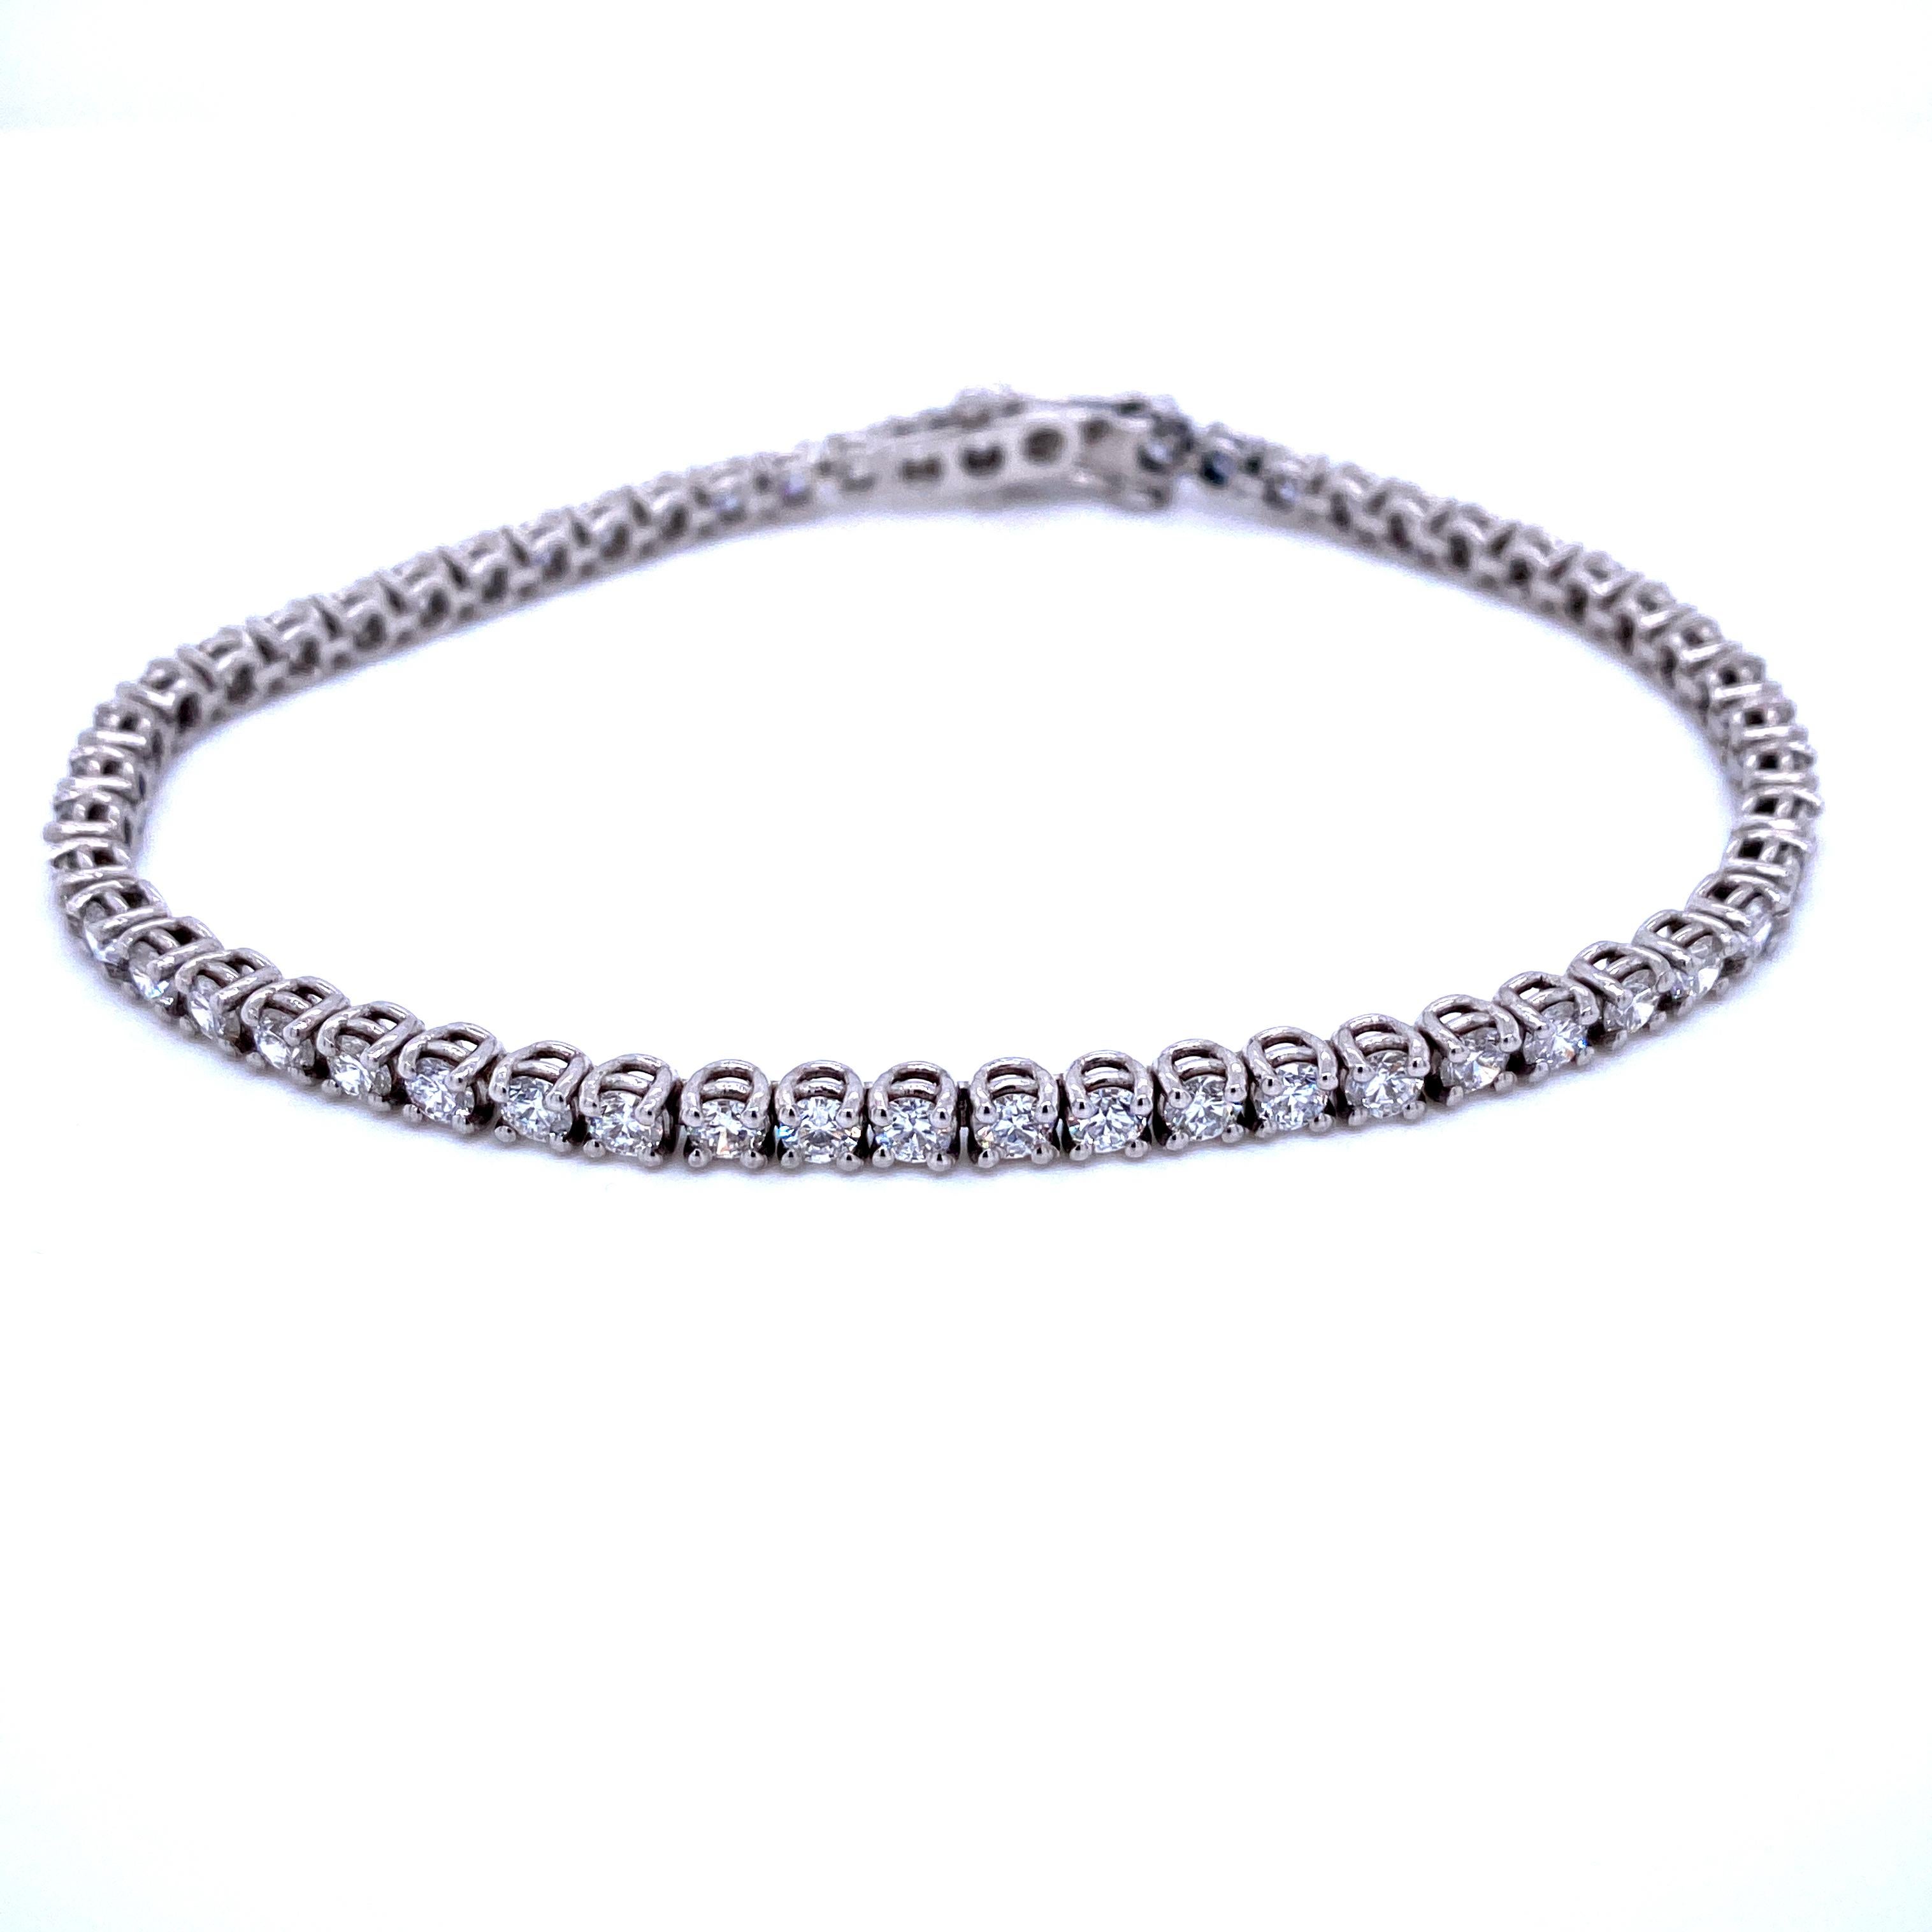 Fabulous brand new bracelet made in solid 18k white gold and set with 5 Carats of top quality sparkling Round brilliant cut diamond, graded G color Vvs clarity.
This piece is designed and crafted in our laboratories, thanks to old techniques and